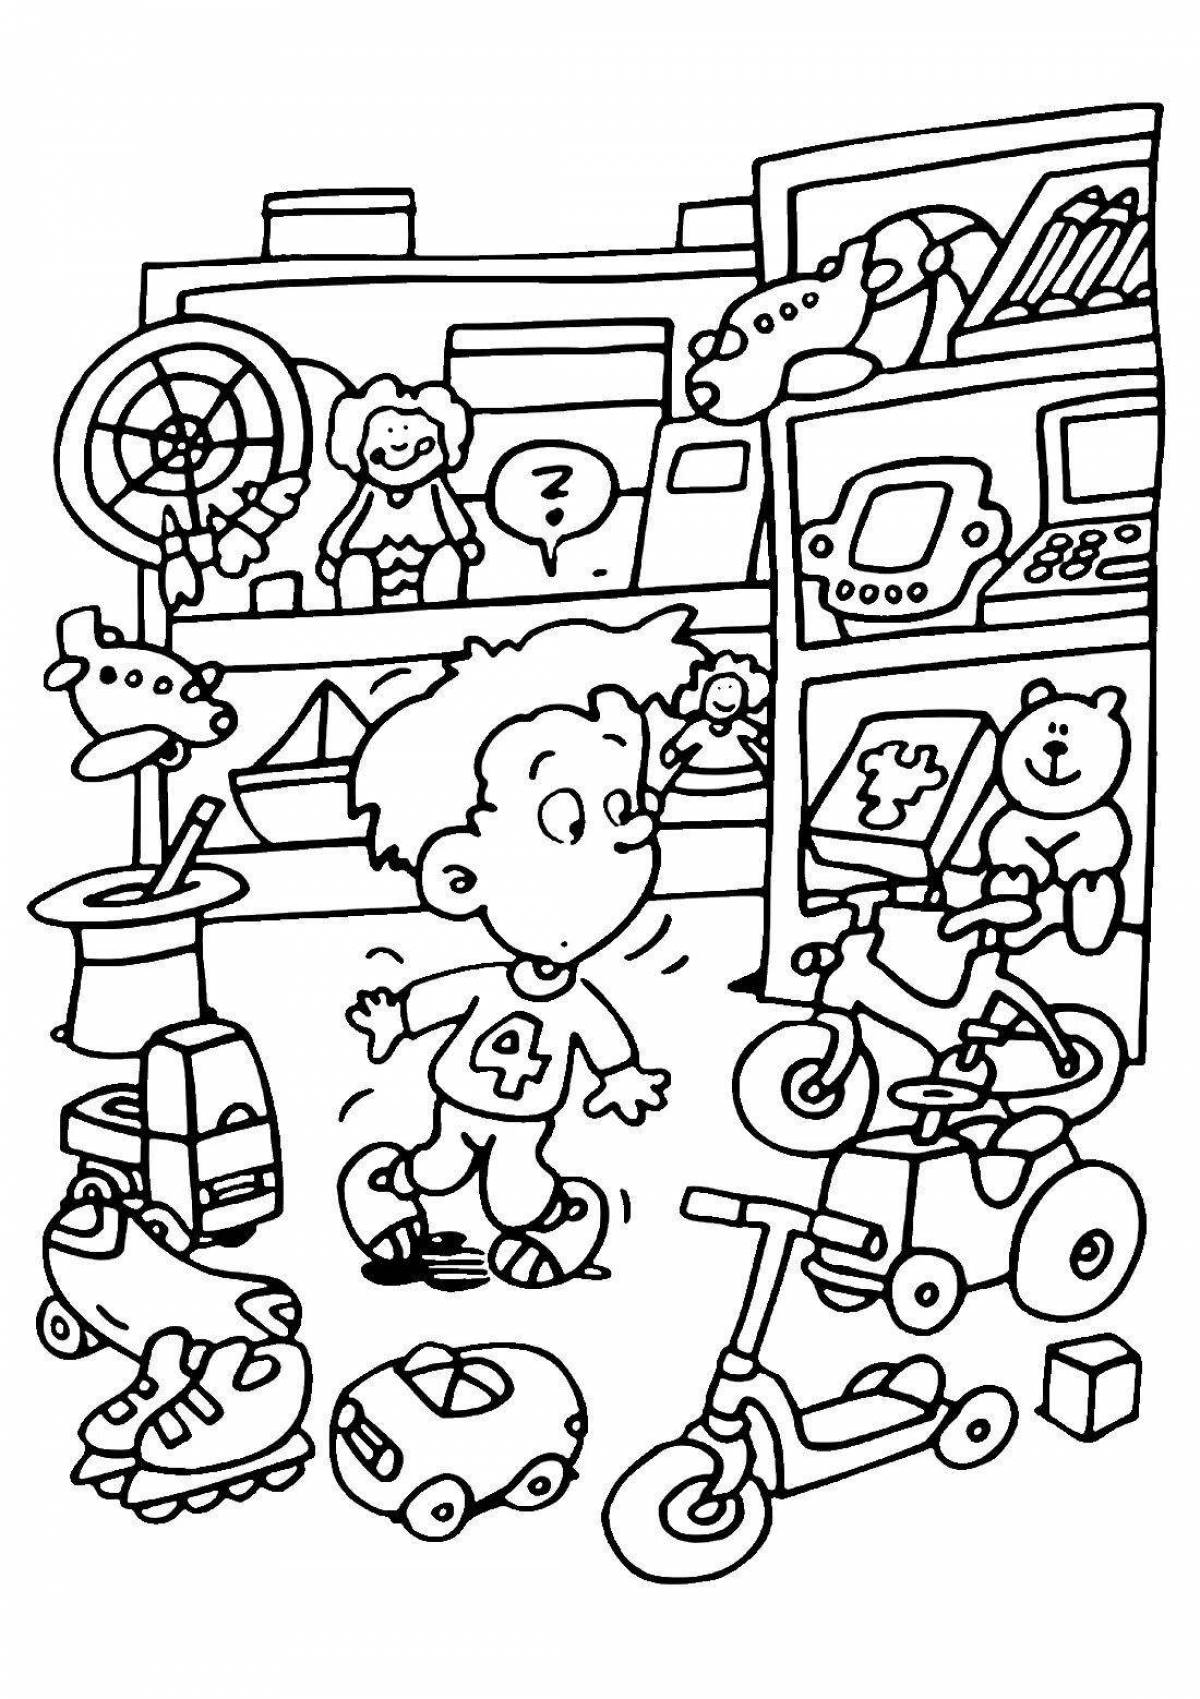 Fun toy factory coloring book